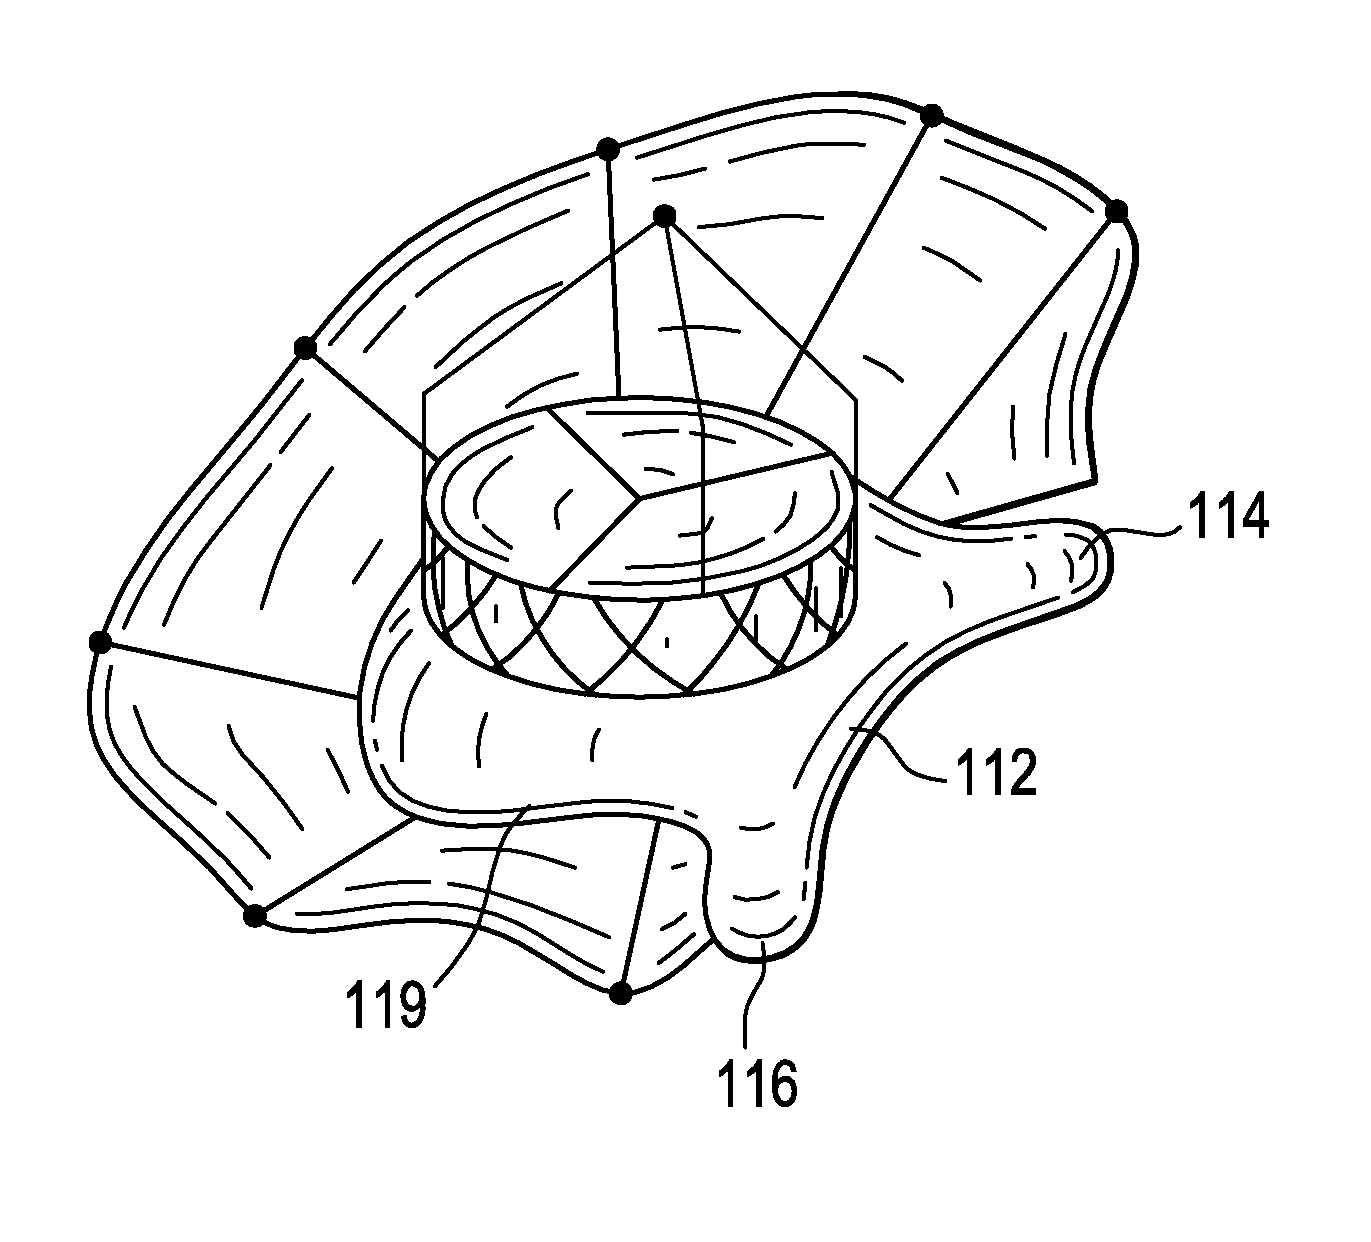 Inflatable Annular Sealing Device for Prosthetic Mitral Valve